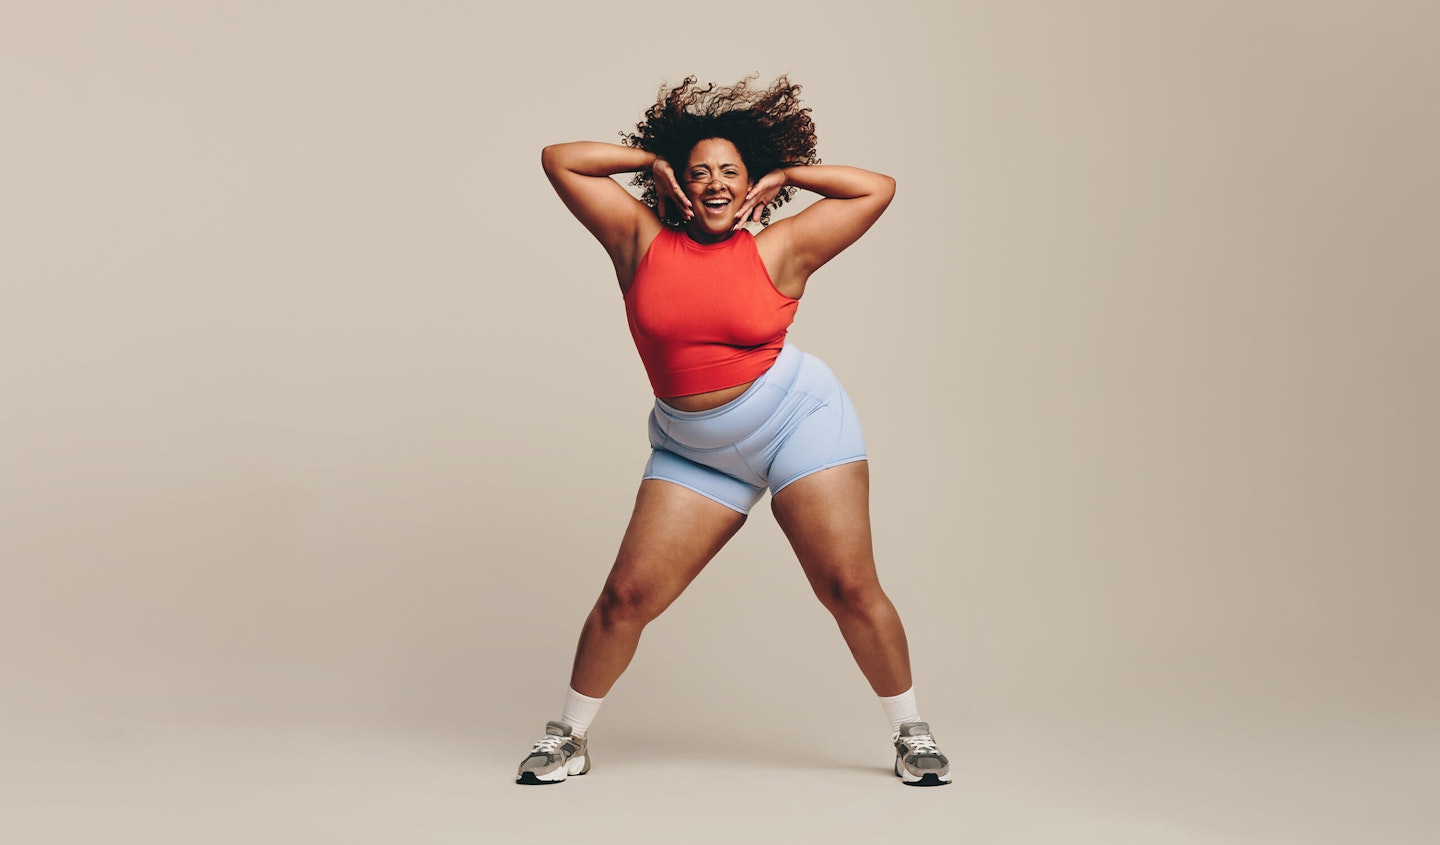 Fit woman having a blast as she moves her body in a dance workout session. Sporty woman putting her toned physique and athletic abilities on display as she lets loose with a fun physical activity